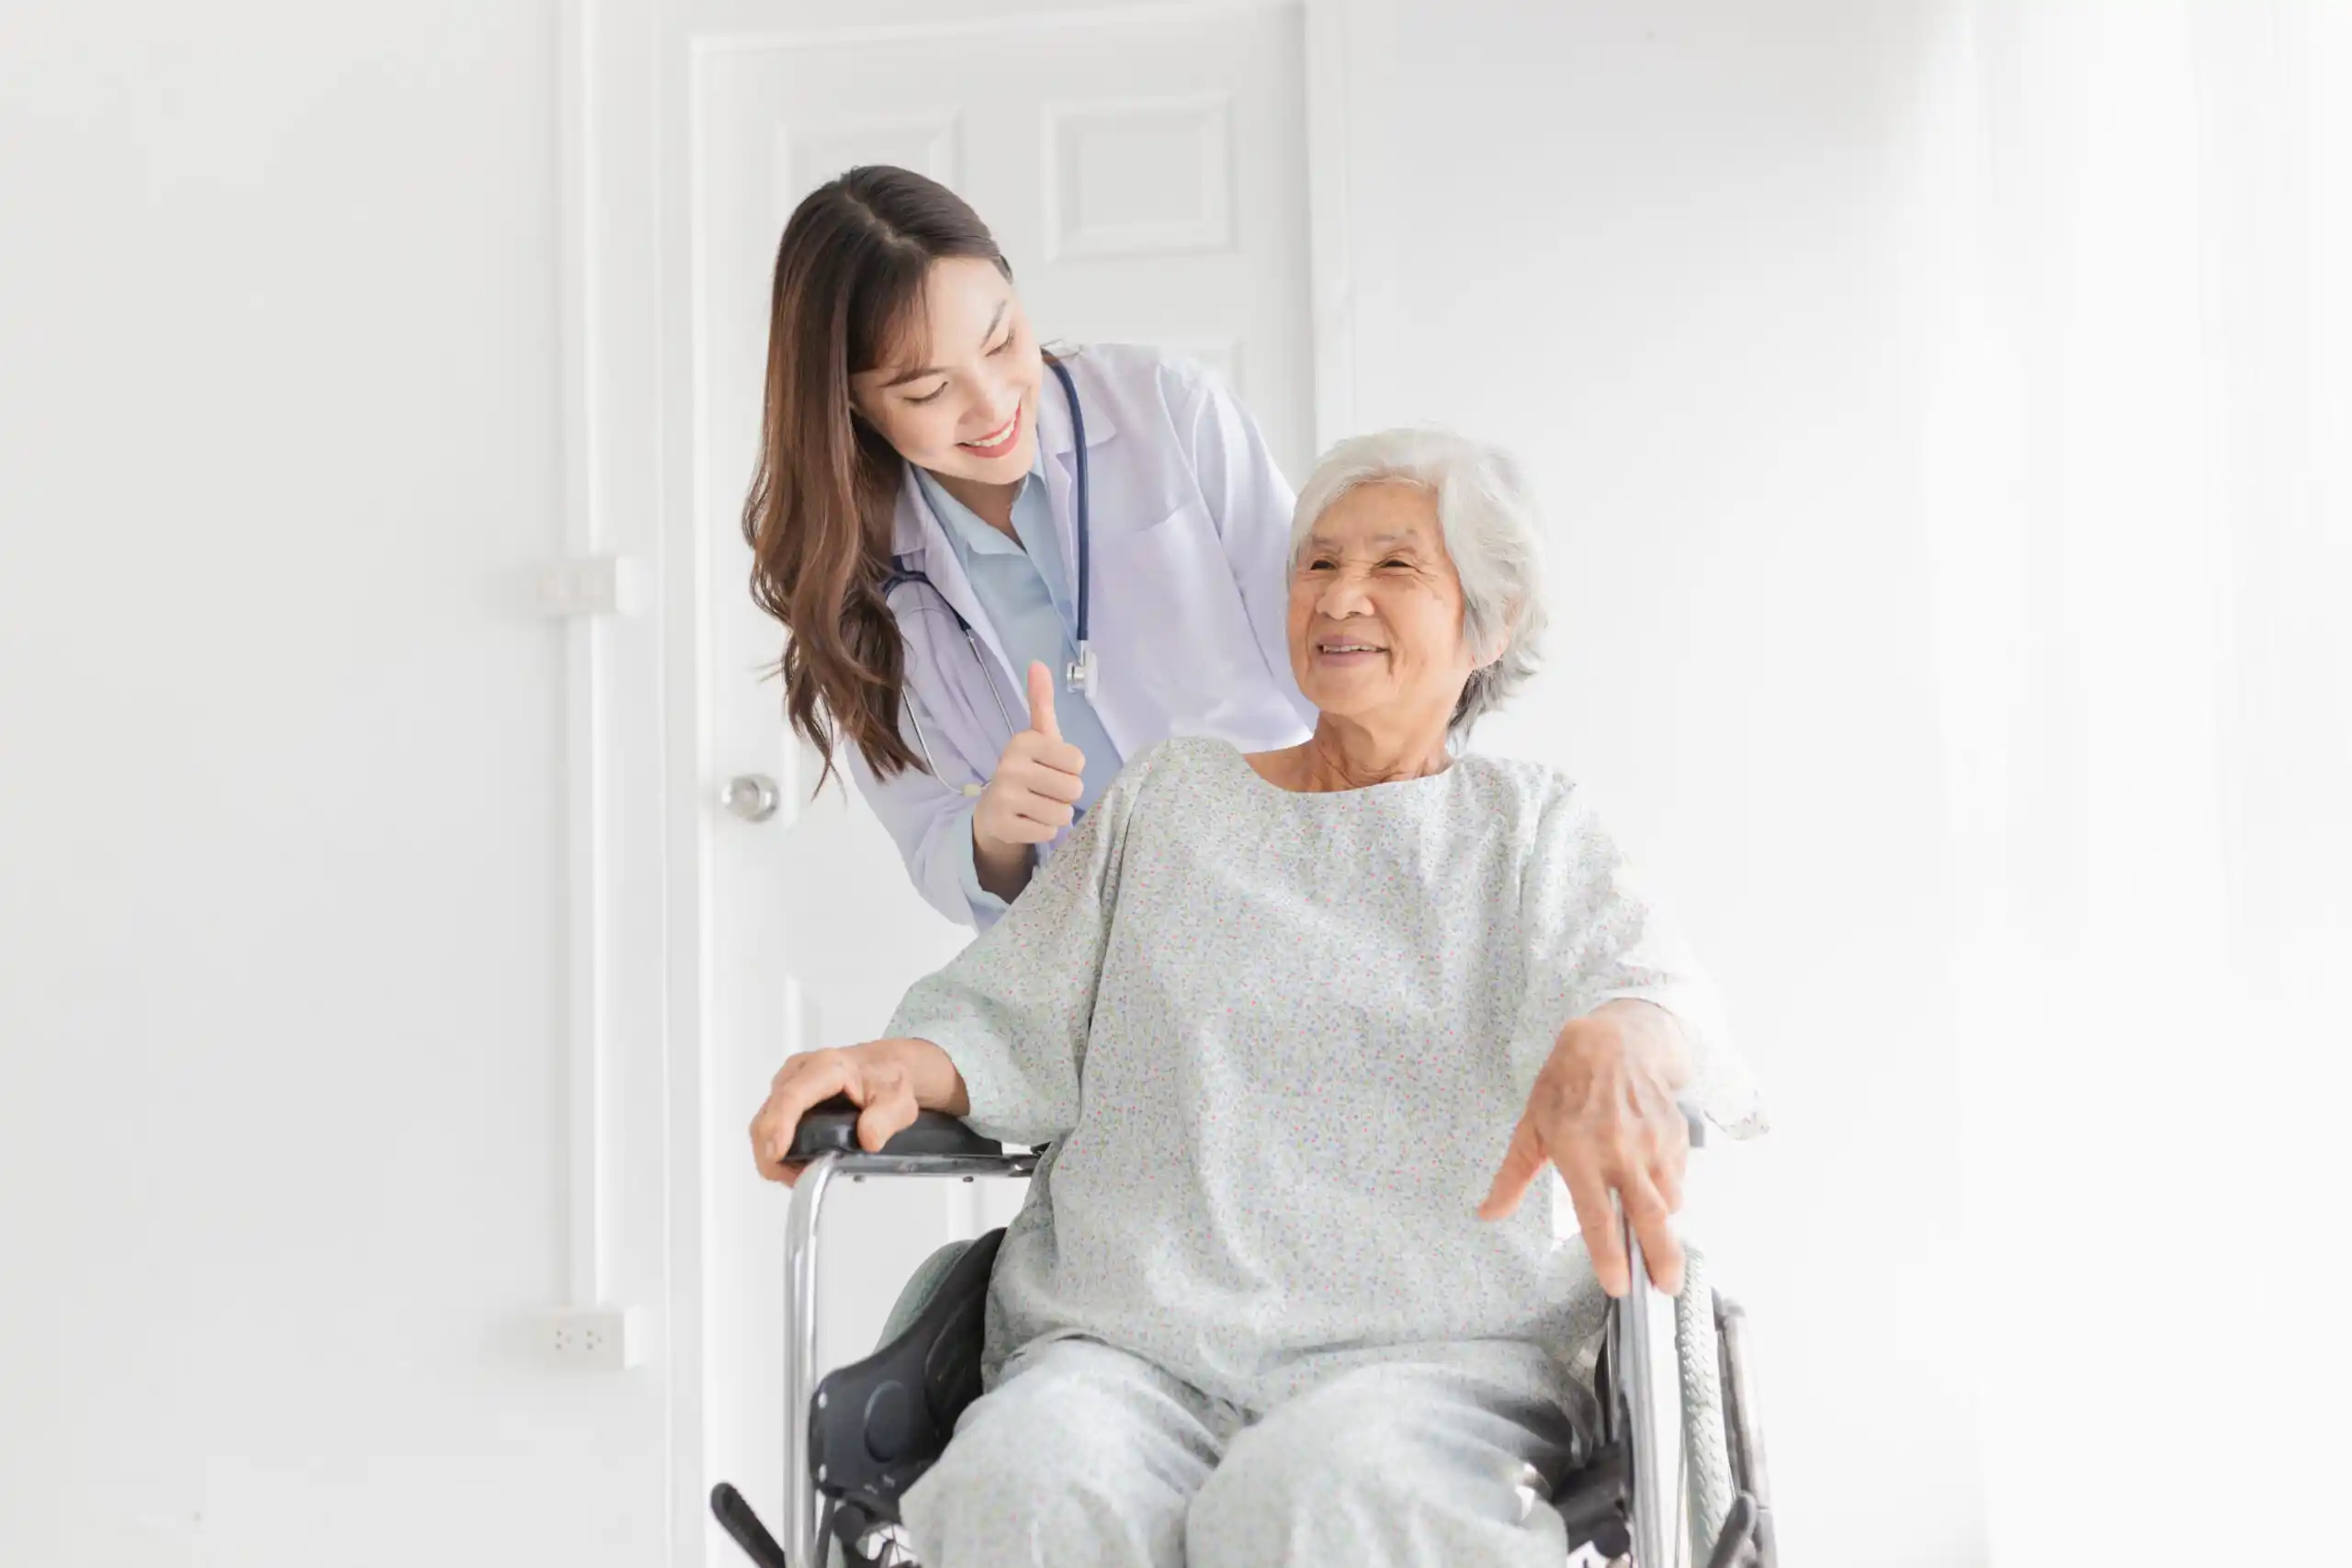 Long Term Care Insurance: Pros and Cons Breakdown